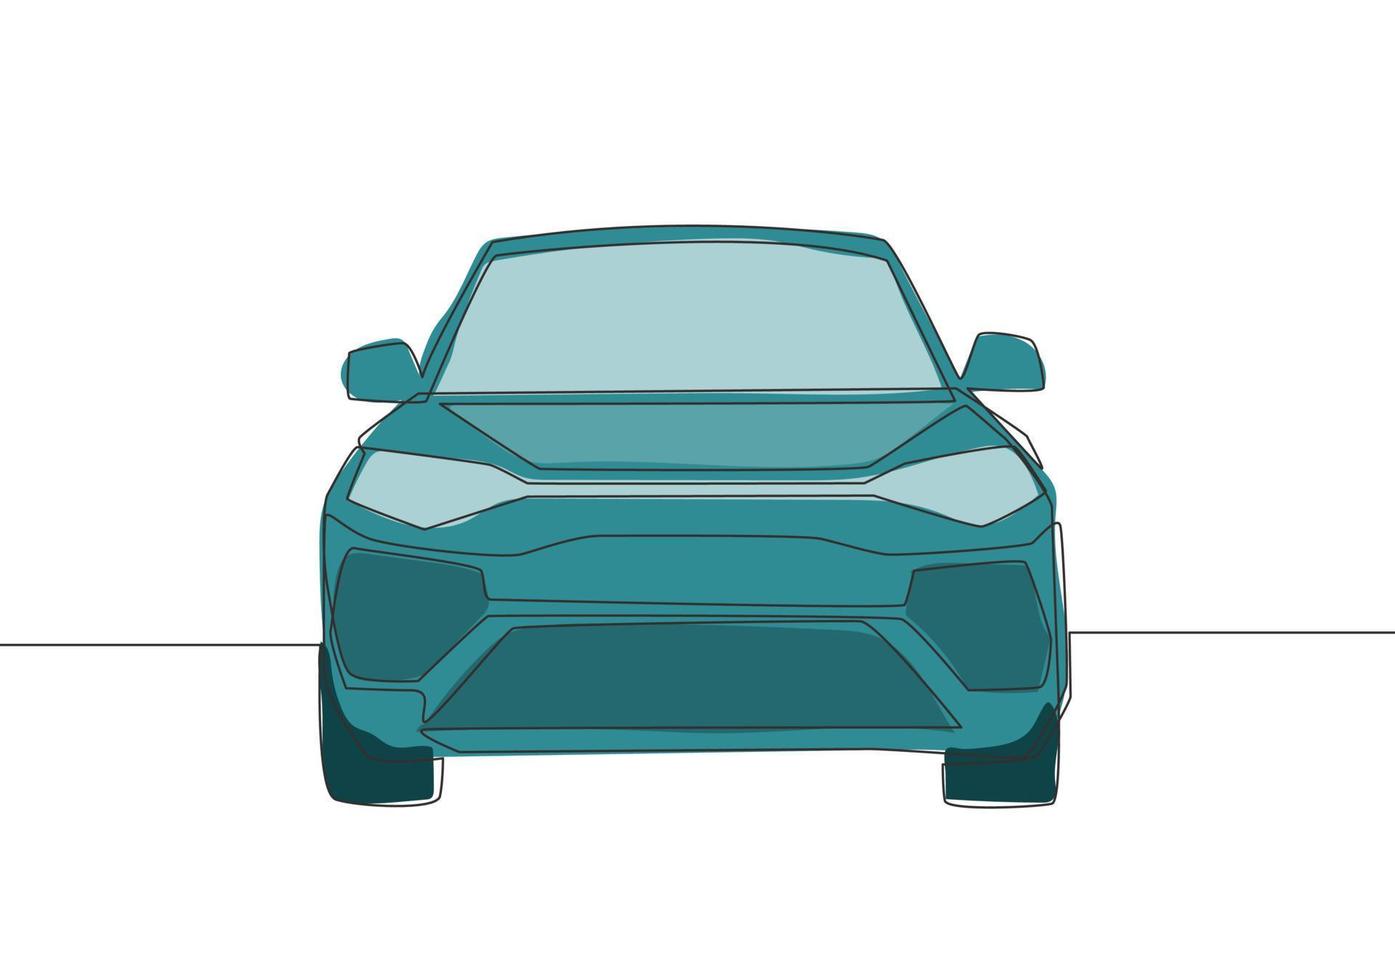 Continuous line drawing of luxury suv car from front view. Urban city vehicle transportation concept. One single continuous line draw design vector